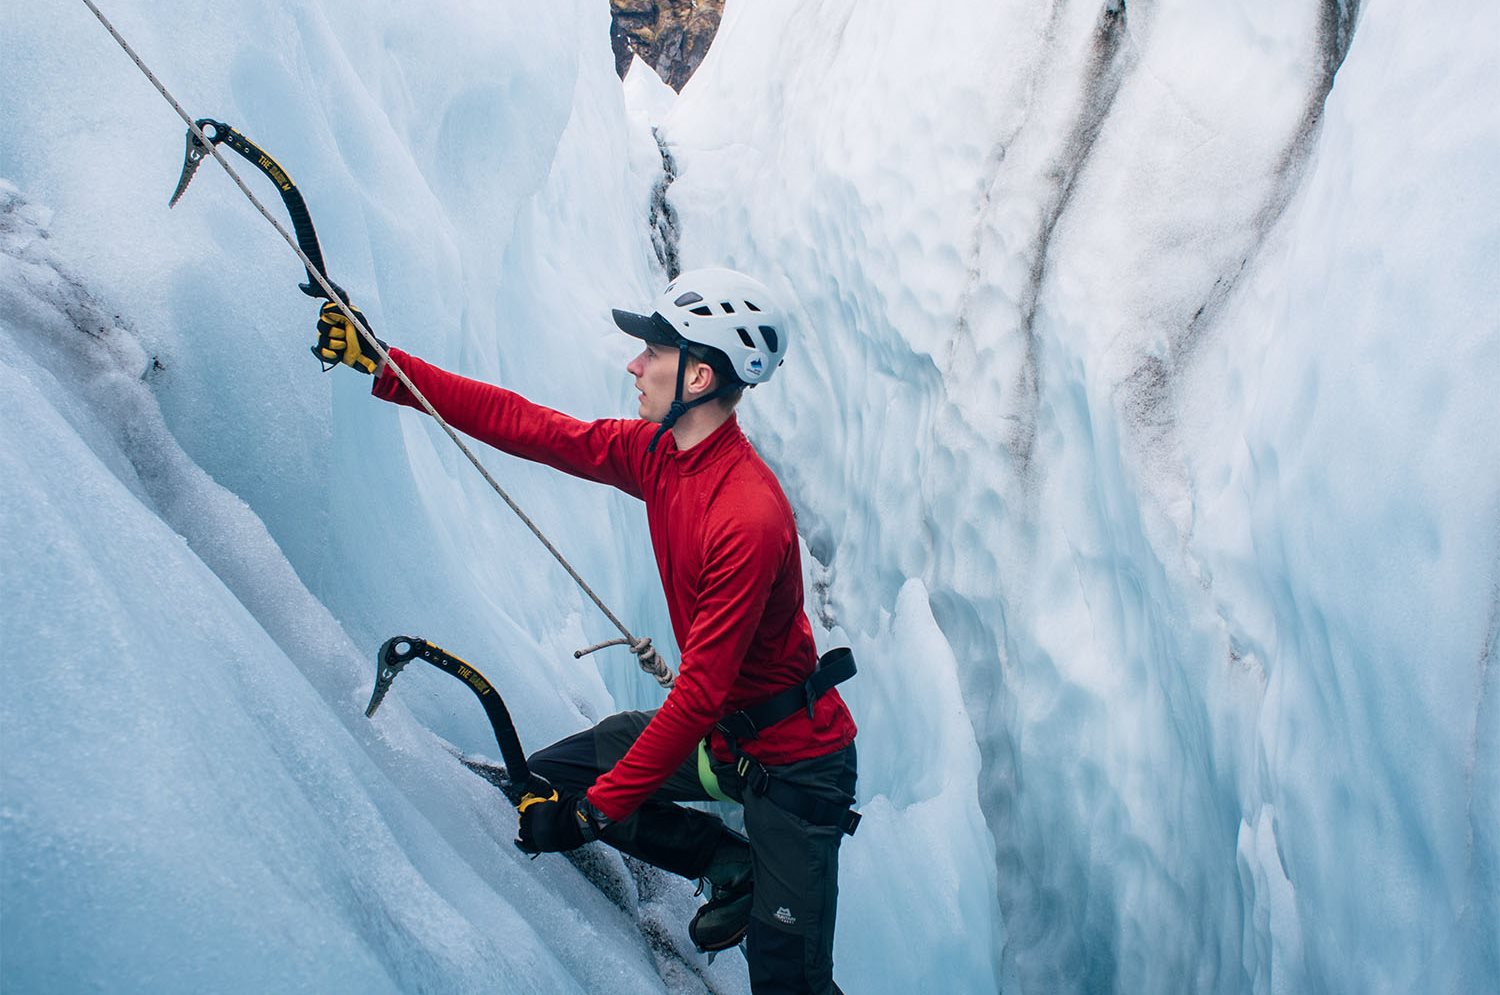 Go ice climbing with an expert glacier guide.